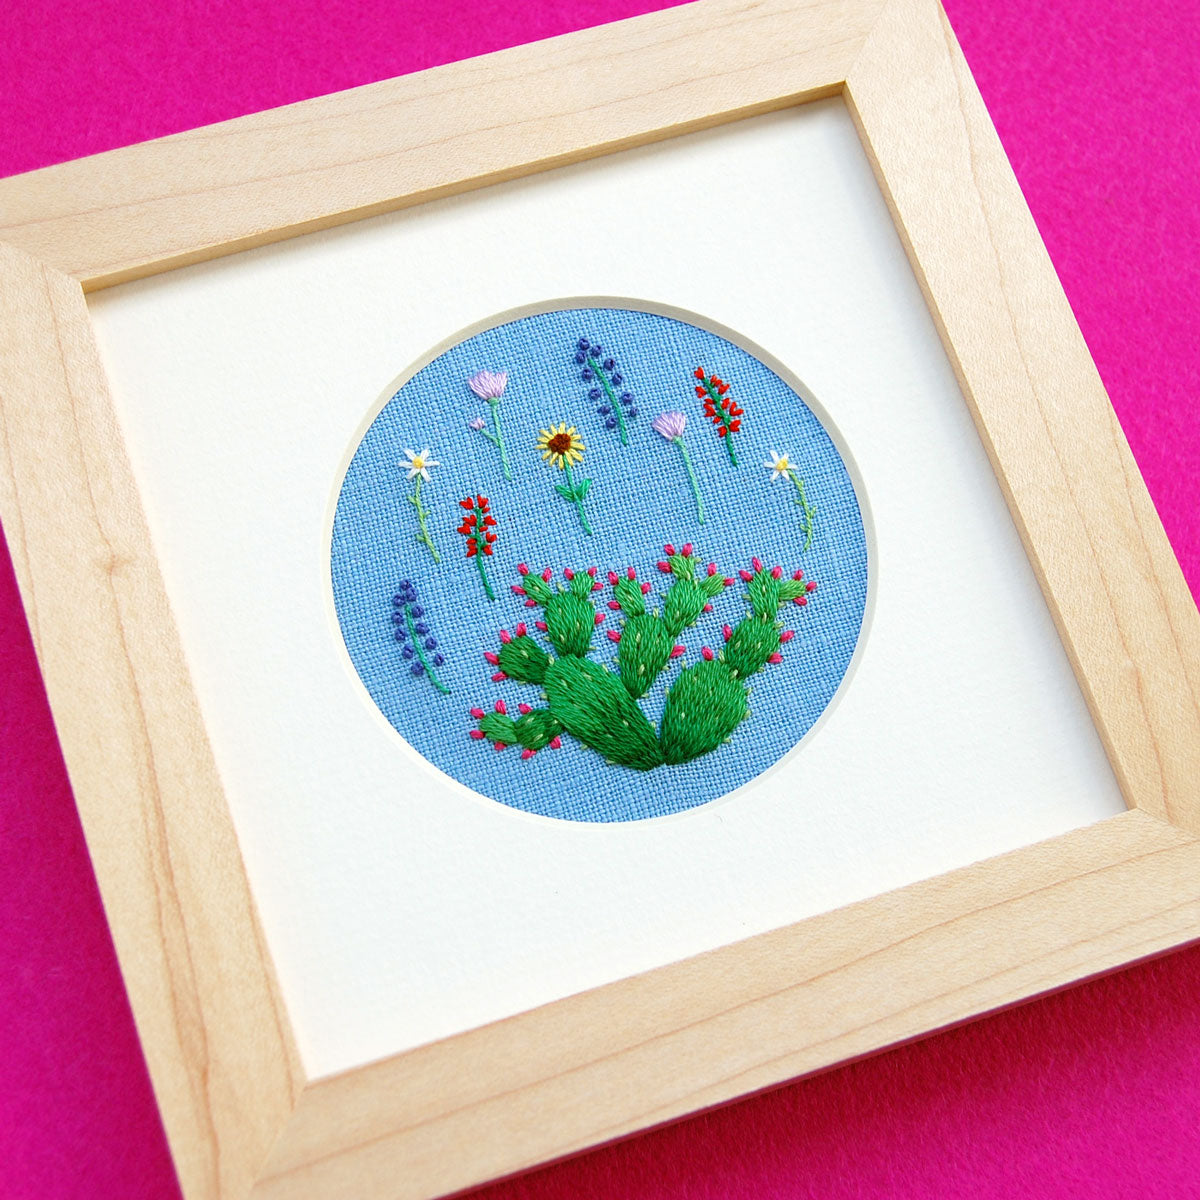 Happy Cactus Designs Hand Embroidered Art • Image and Design Copyright Happy Cactus Designs LLC